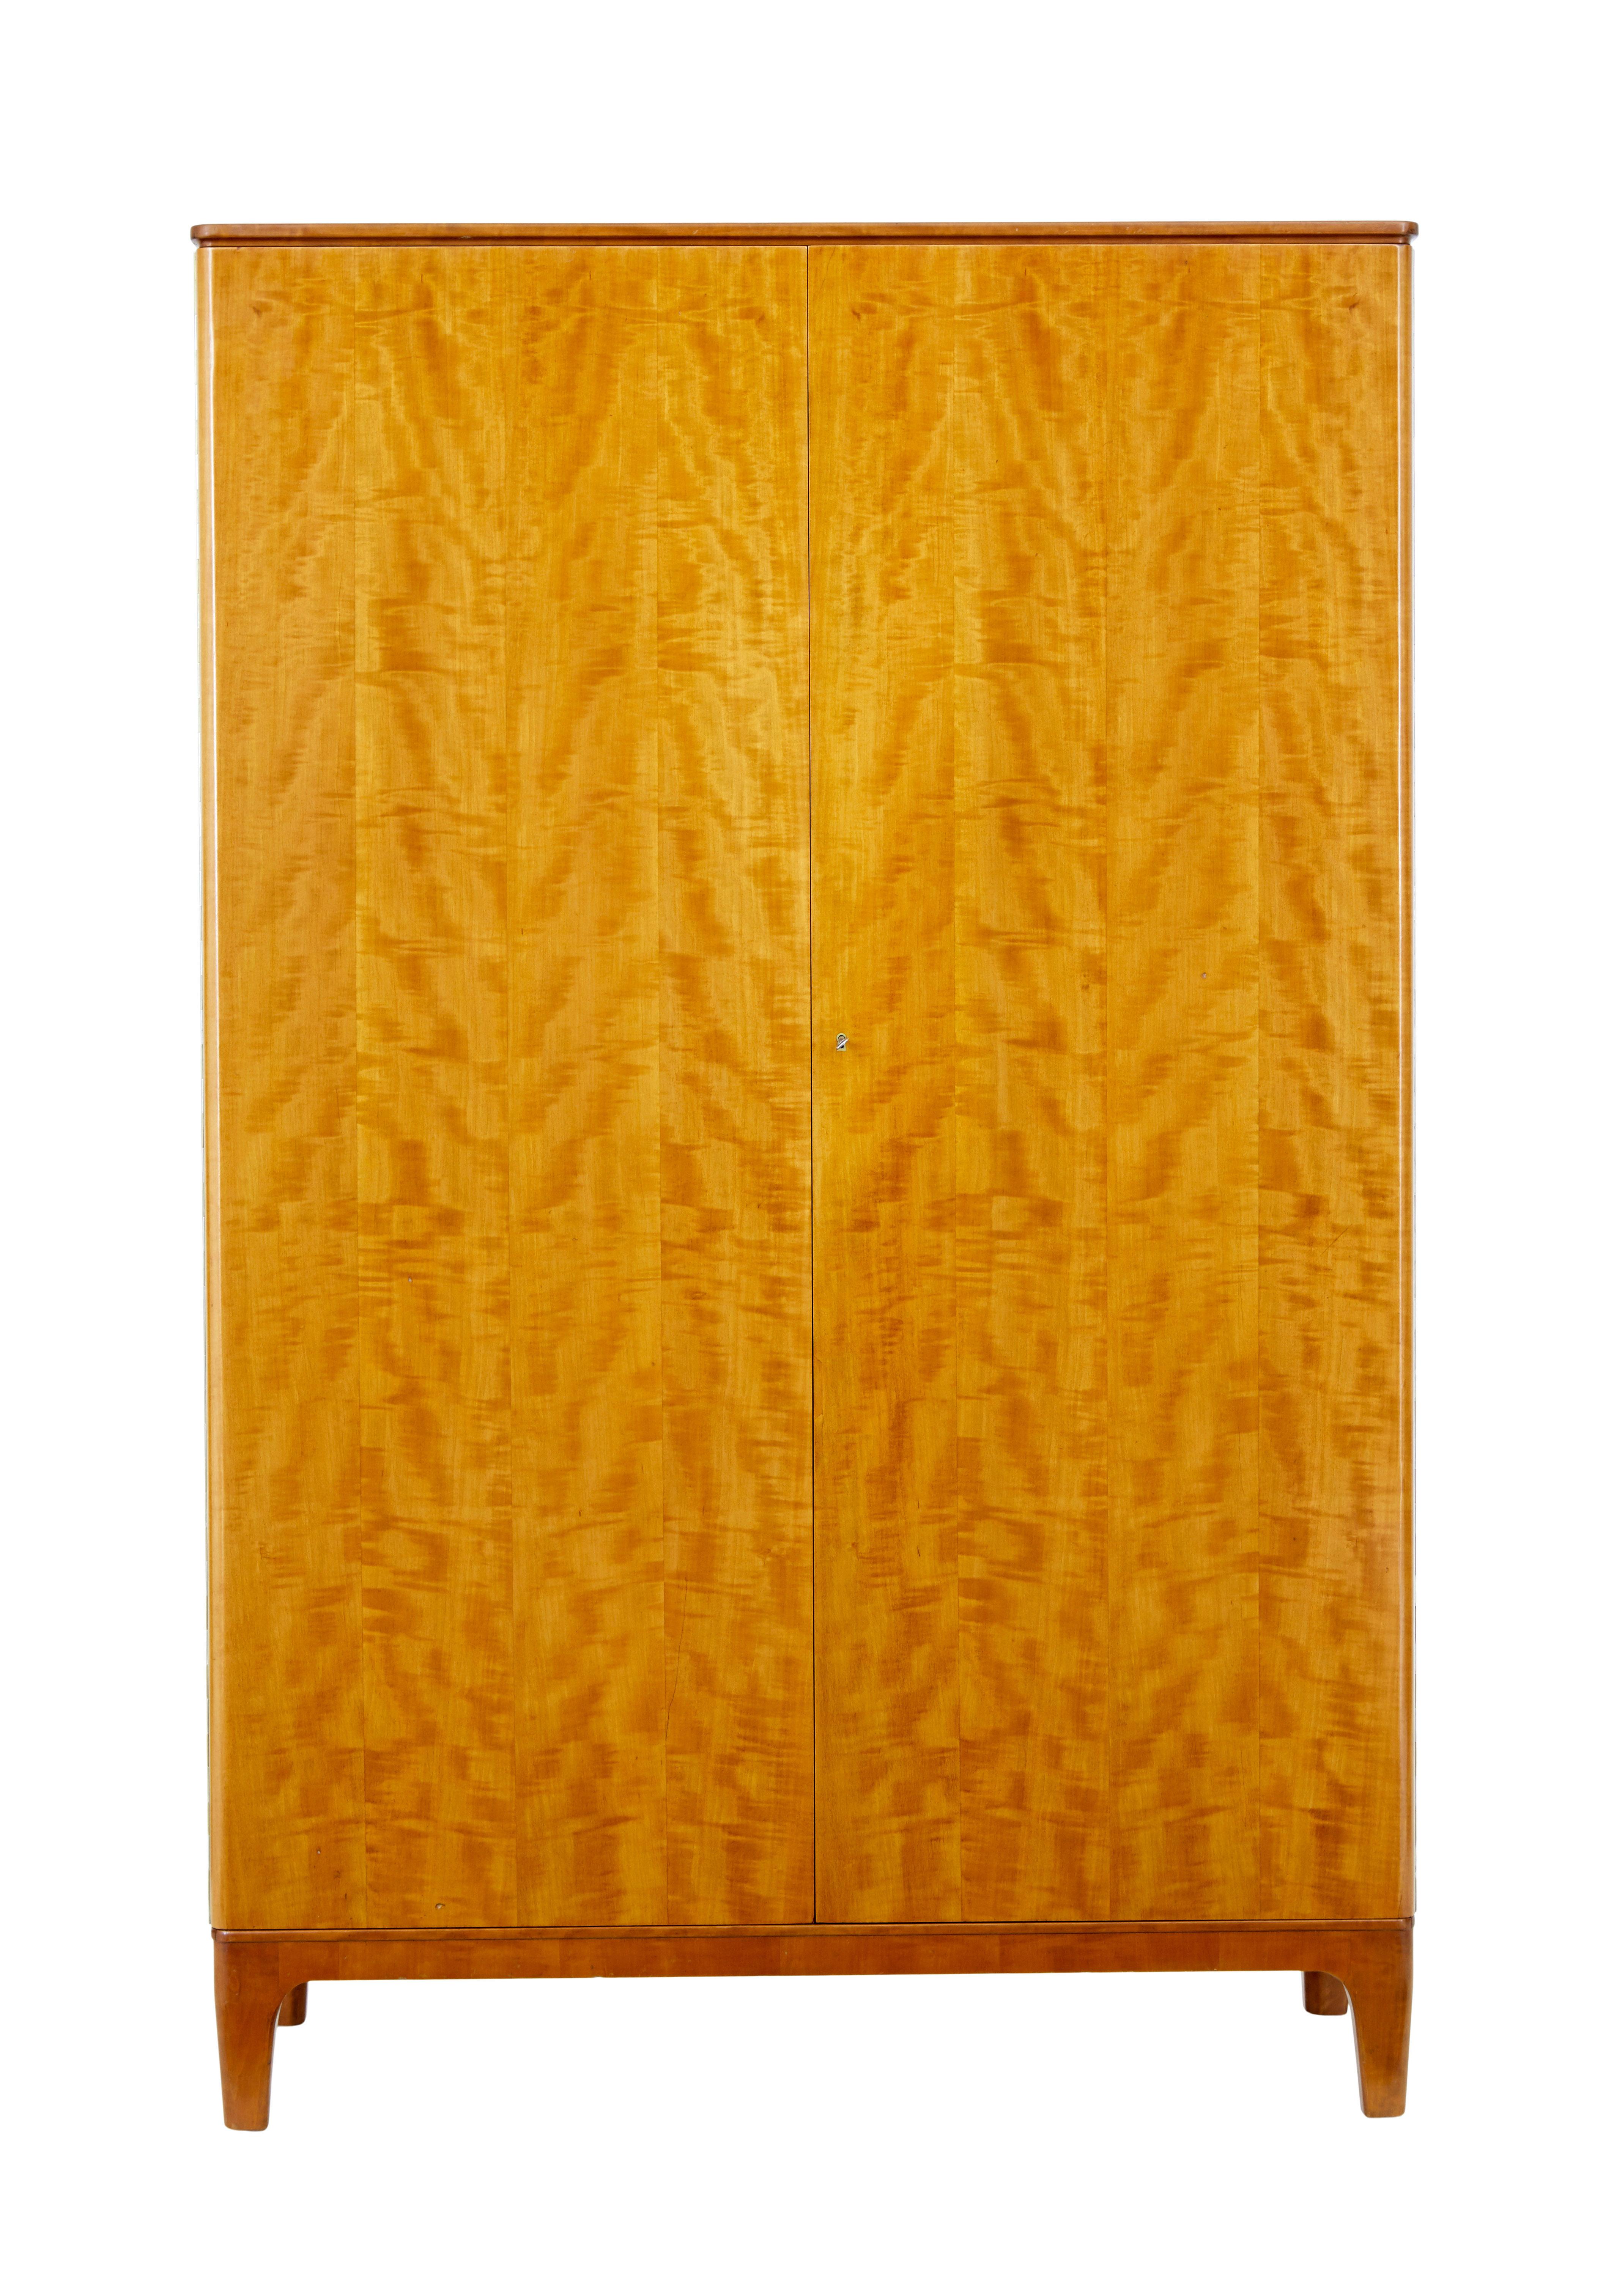 Mid century birch wardrobe by Oscar Nilsson for Nordiska Kompaniet circa 1939.

We are pleased to offer this fitted wardrobe which is an early piece in the scandinavian modern furniture movement.  Designed by oscar nilsson (1895-1975)  this piece is